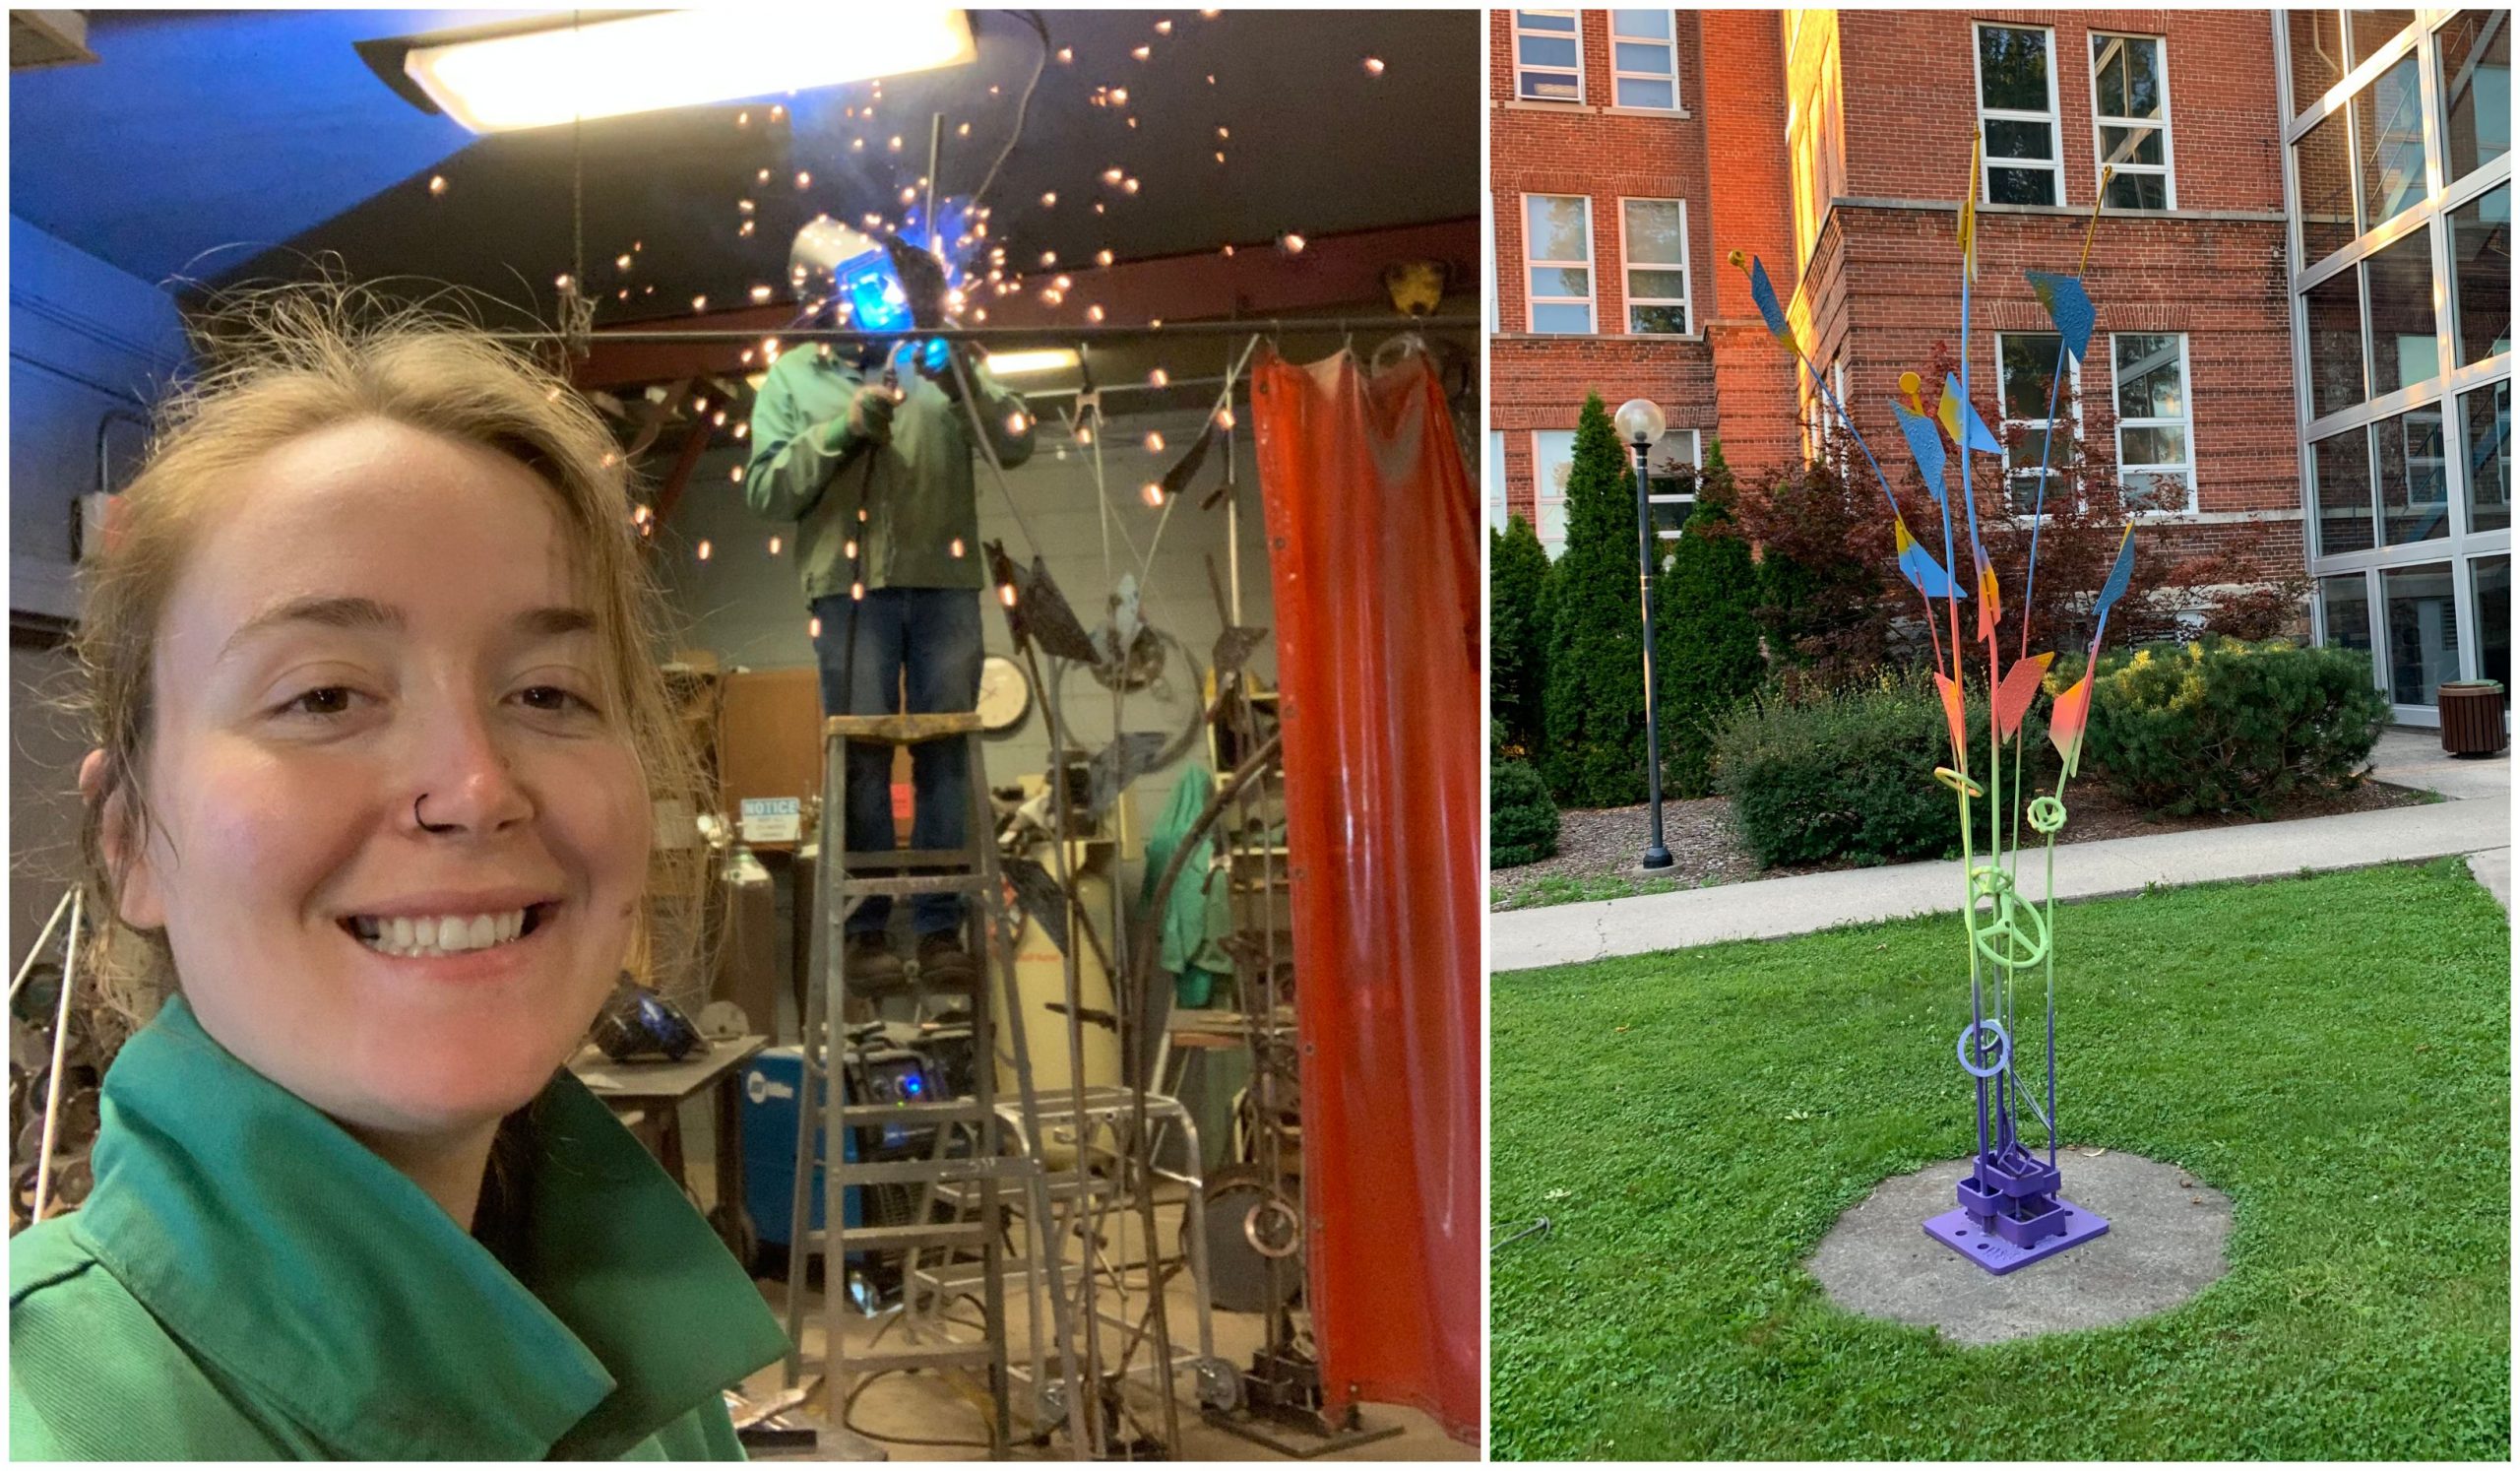 Two pictures: the picture on the left is a student's selfie with the sculpture as it is installed at Merry Lea; the picture on the right is of the sculpture on the Goshen campus. The sculptures resemble leaves and branches and are very colorful